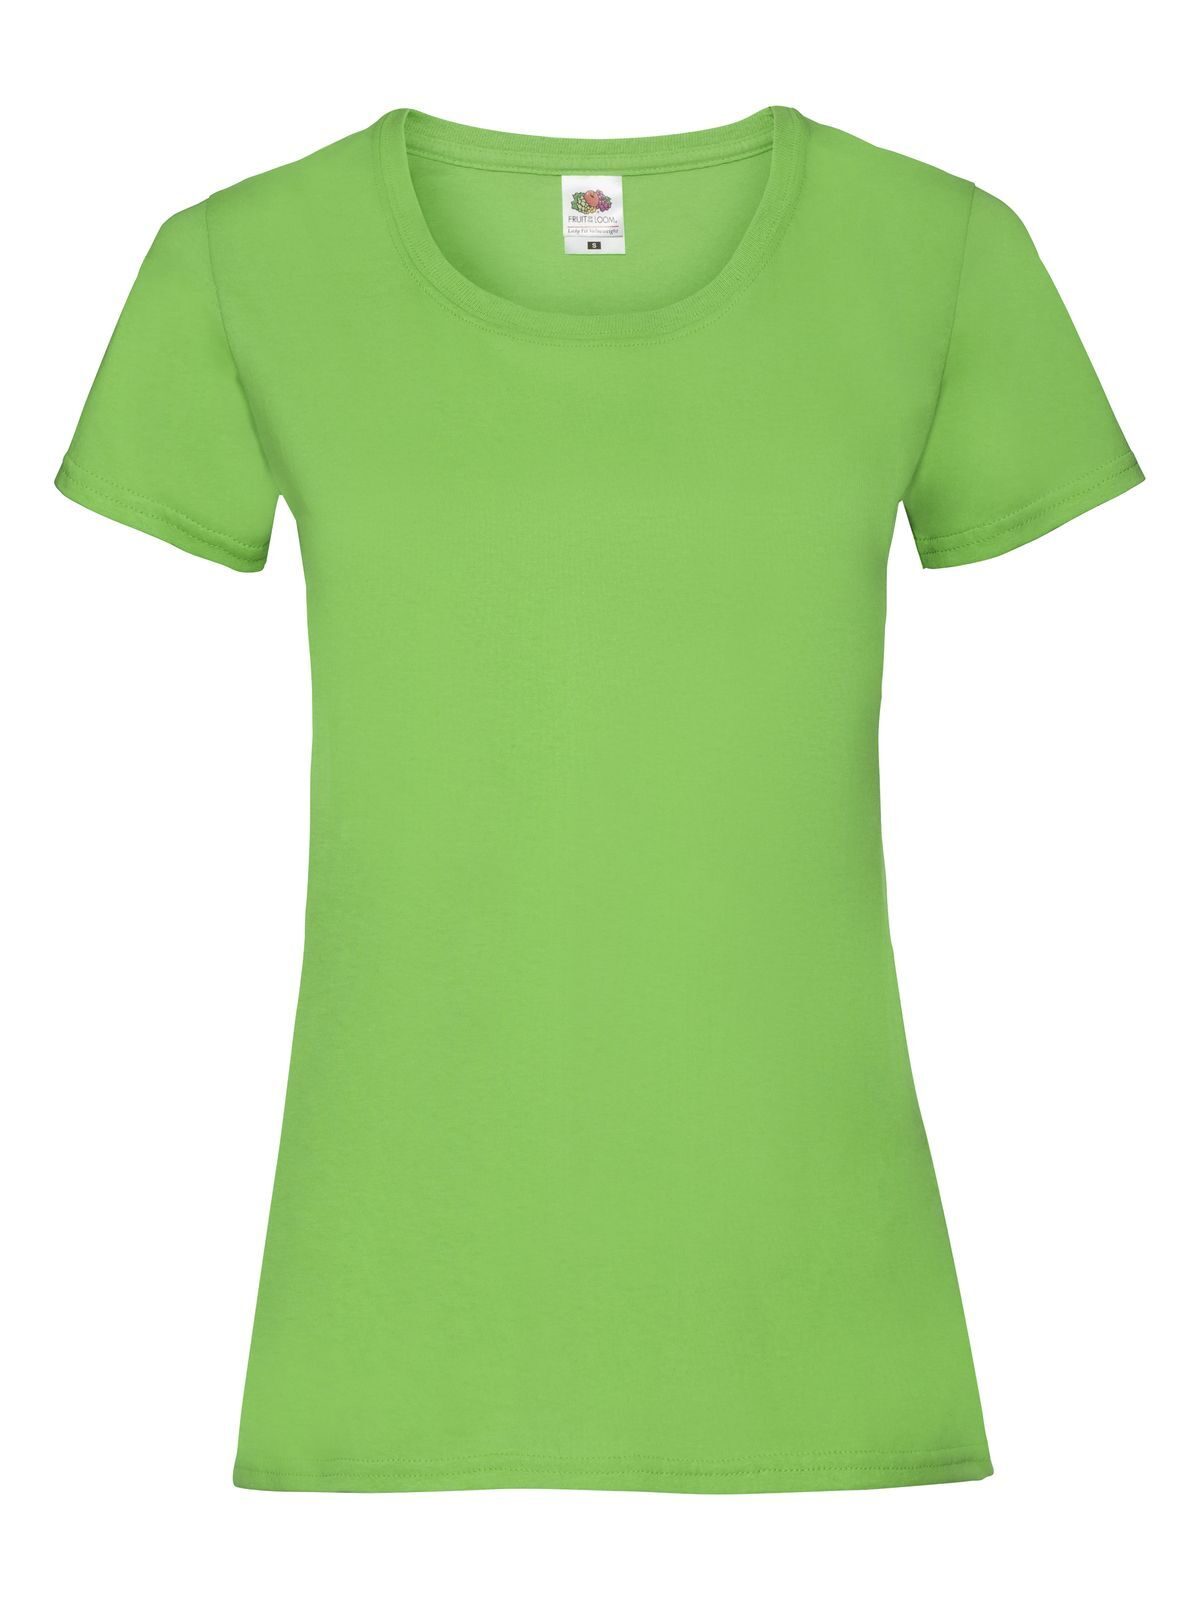 Pittogramma Ladies Valueweight T - FR613720 lime